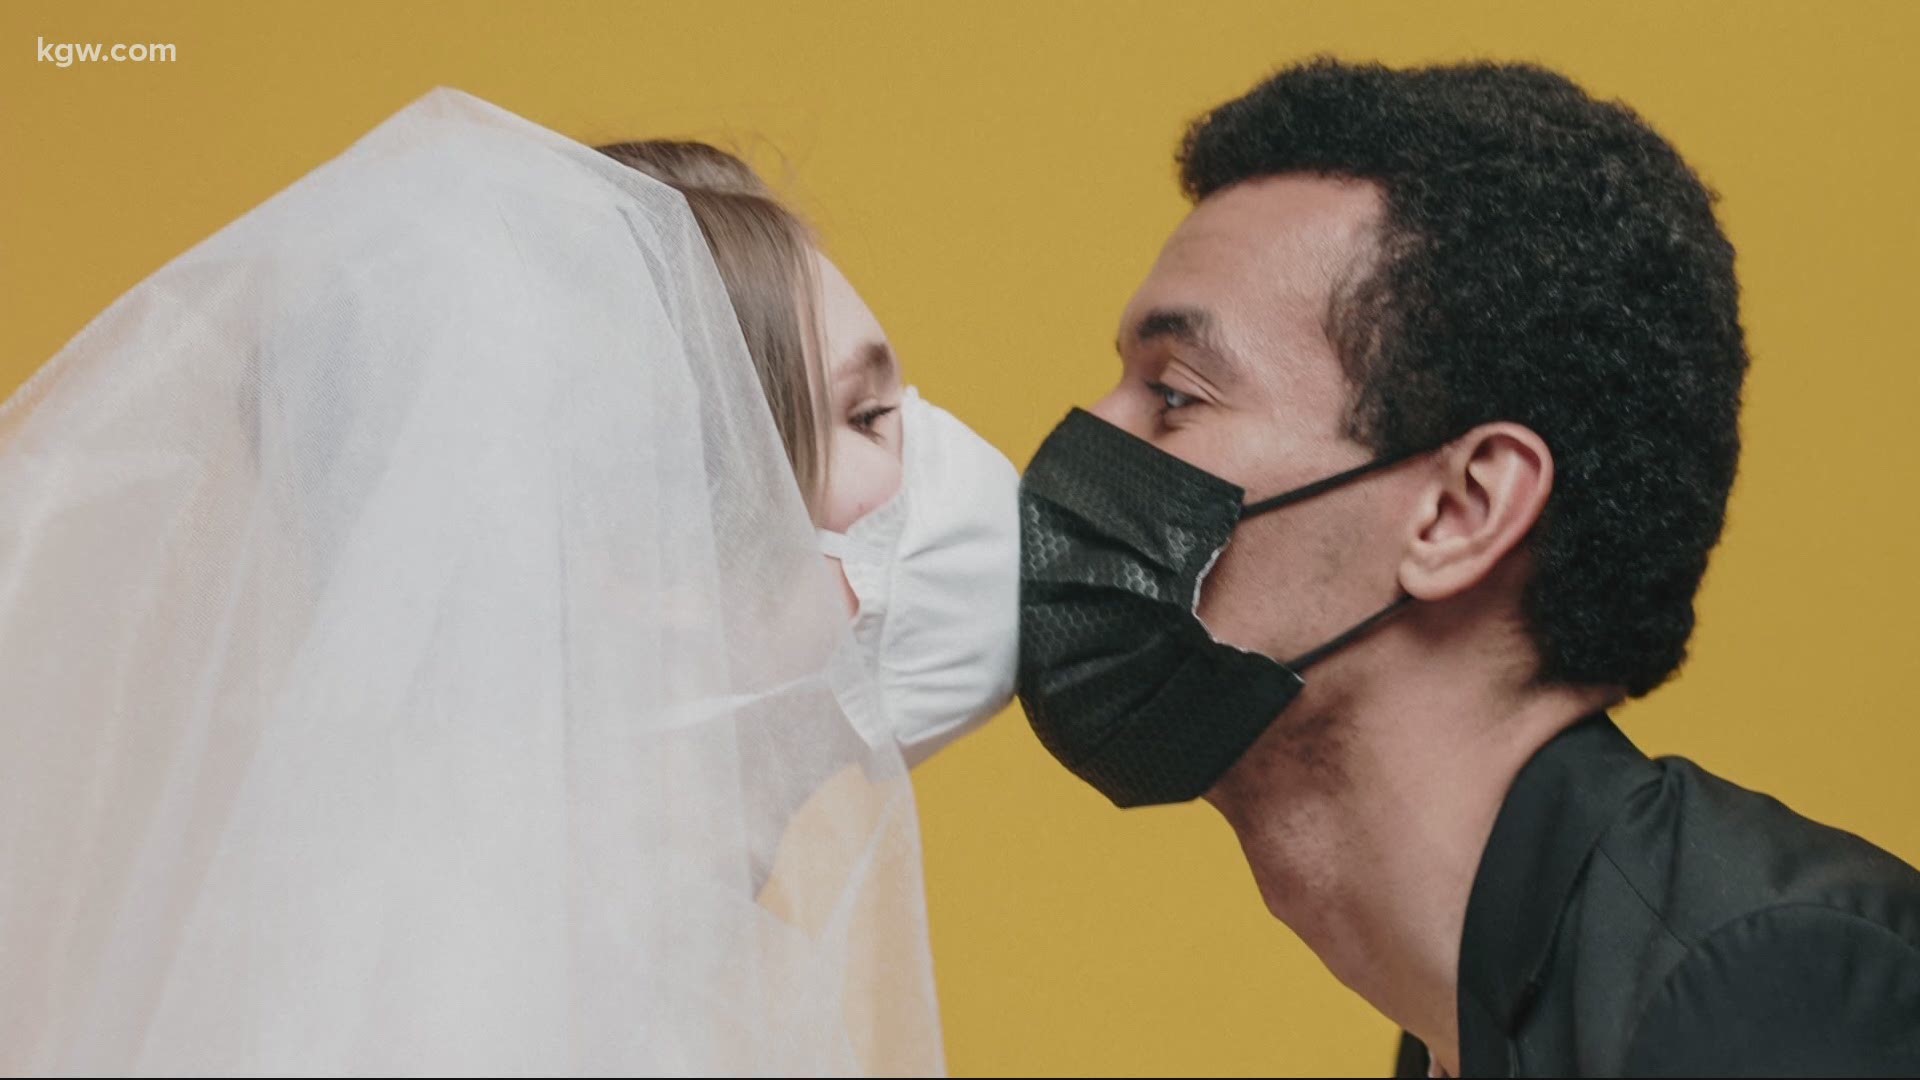 How do people get married during the COVID-19 pandemic? Galen Ettlin reports.